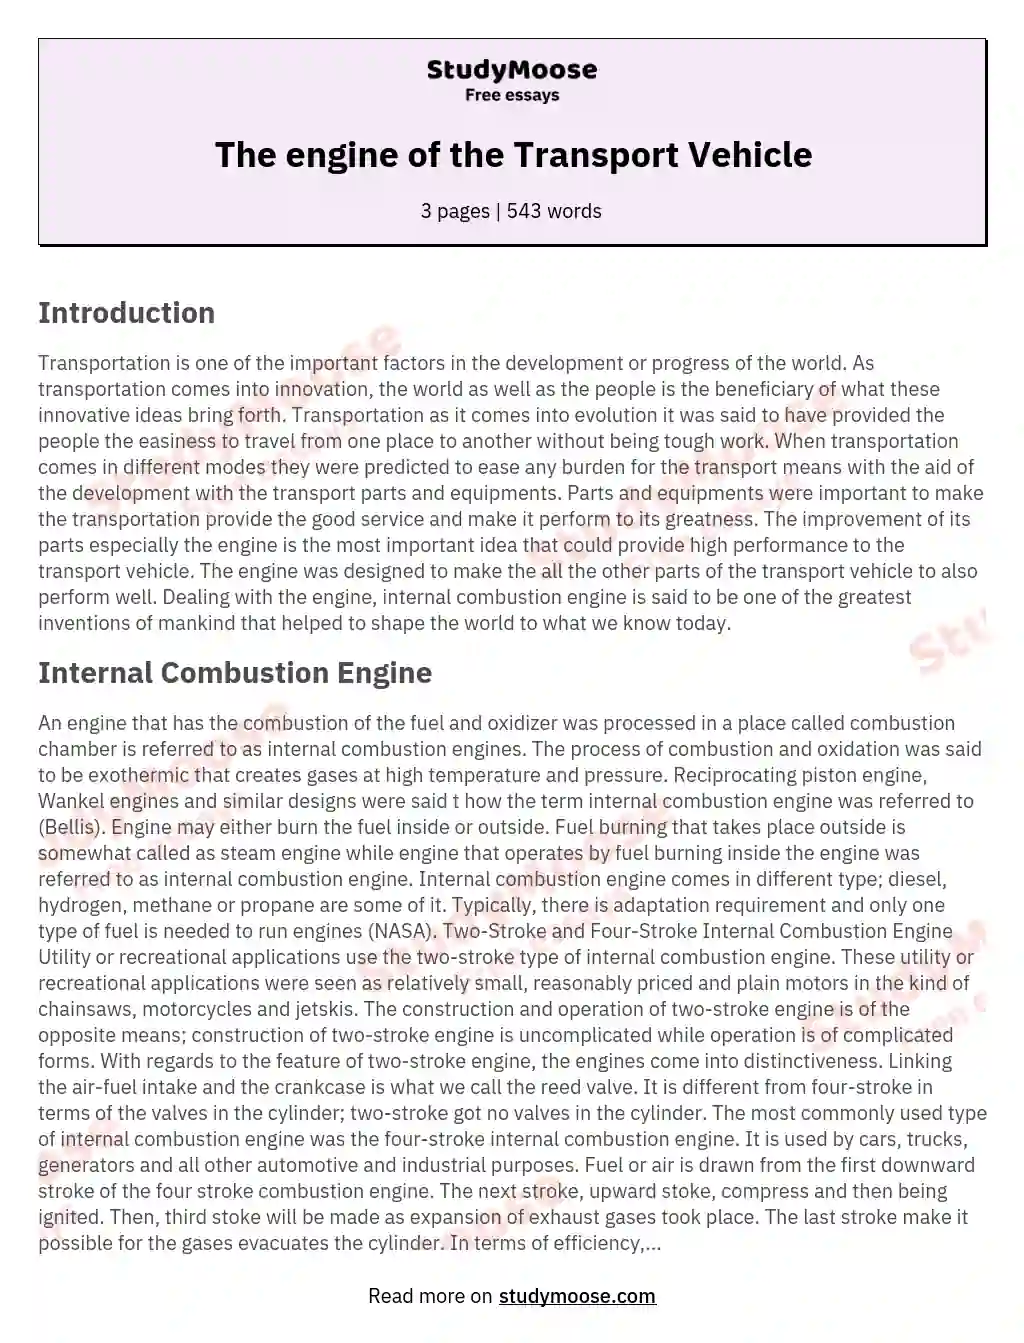 The engine of the Transport Vehicle essay